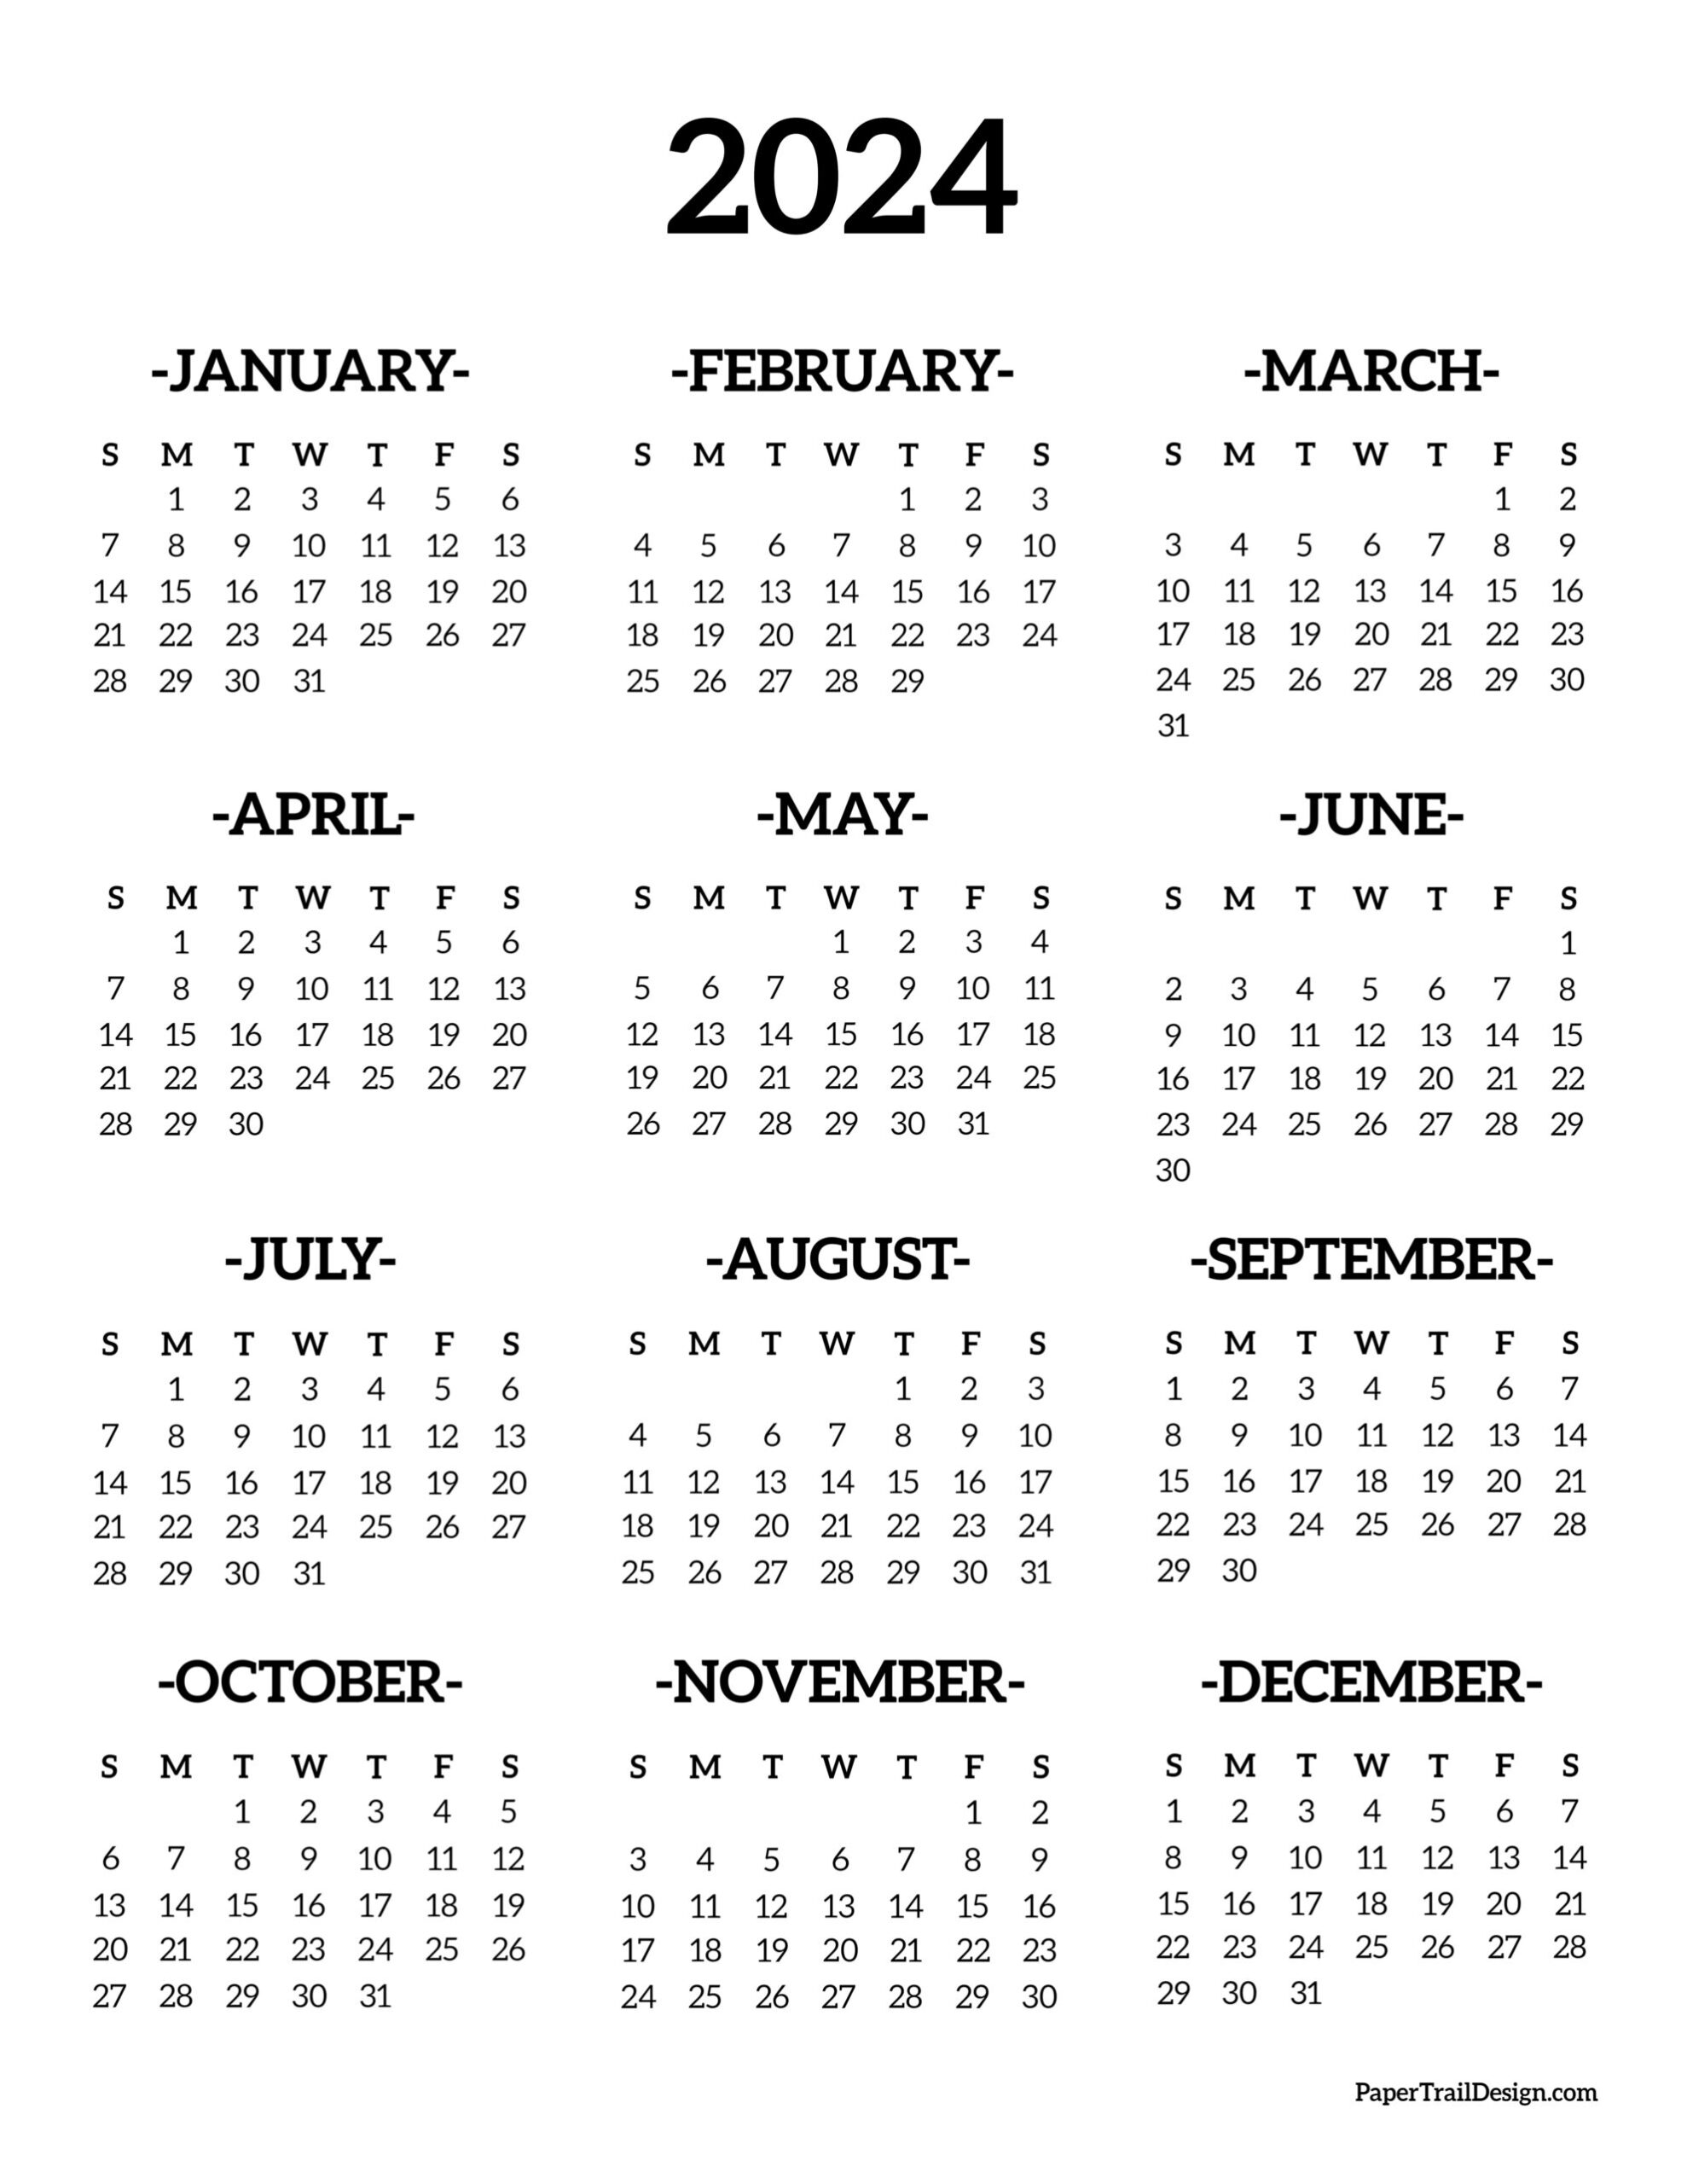 Calendar 2024 Printable One Page - Paper Trail Design for 2024 Printable Calendar One Page Per Month